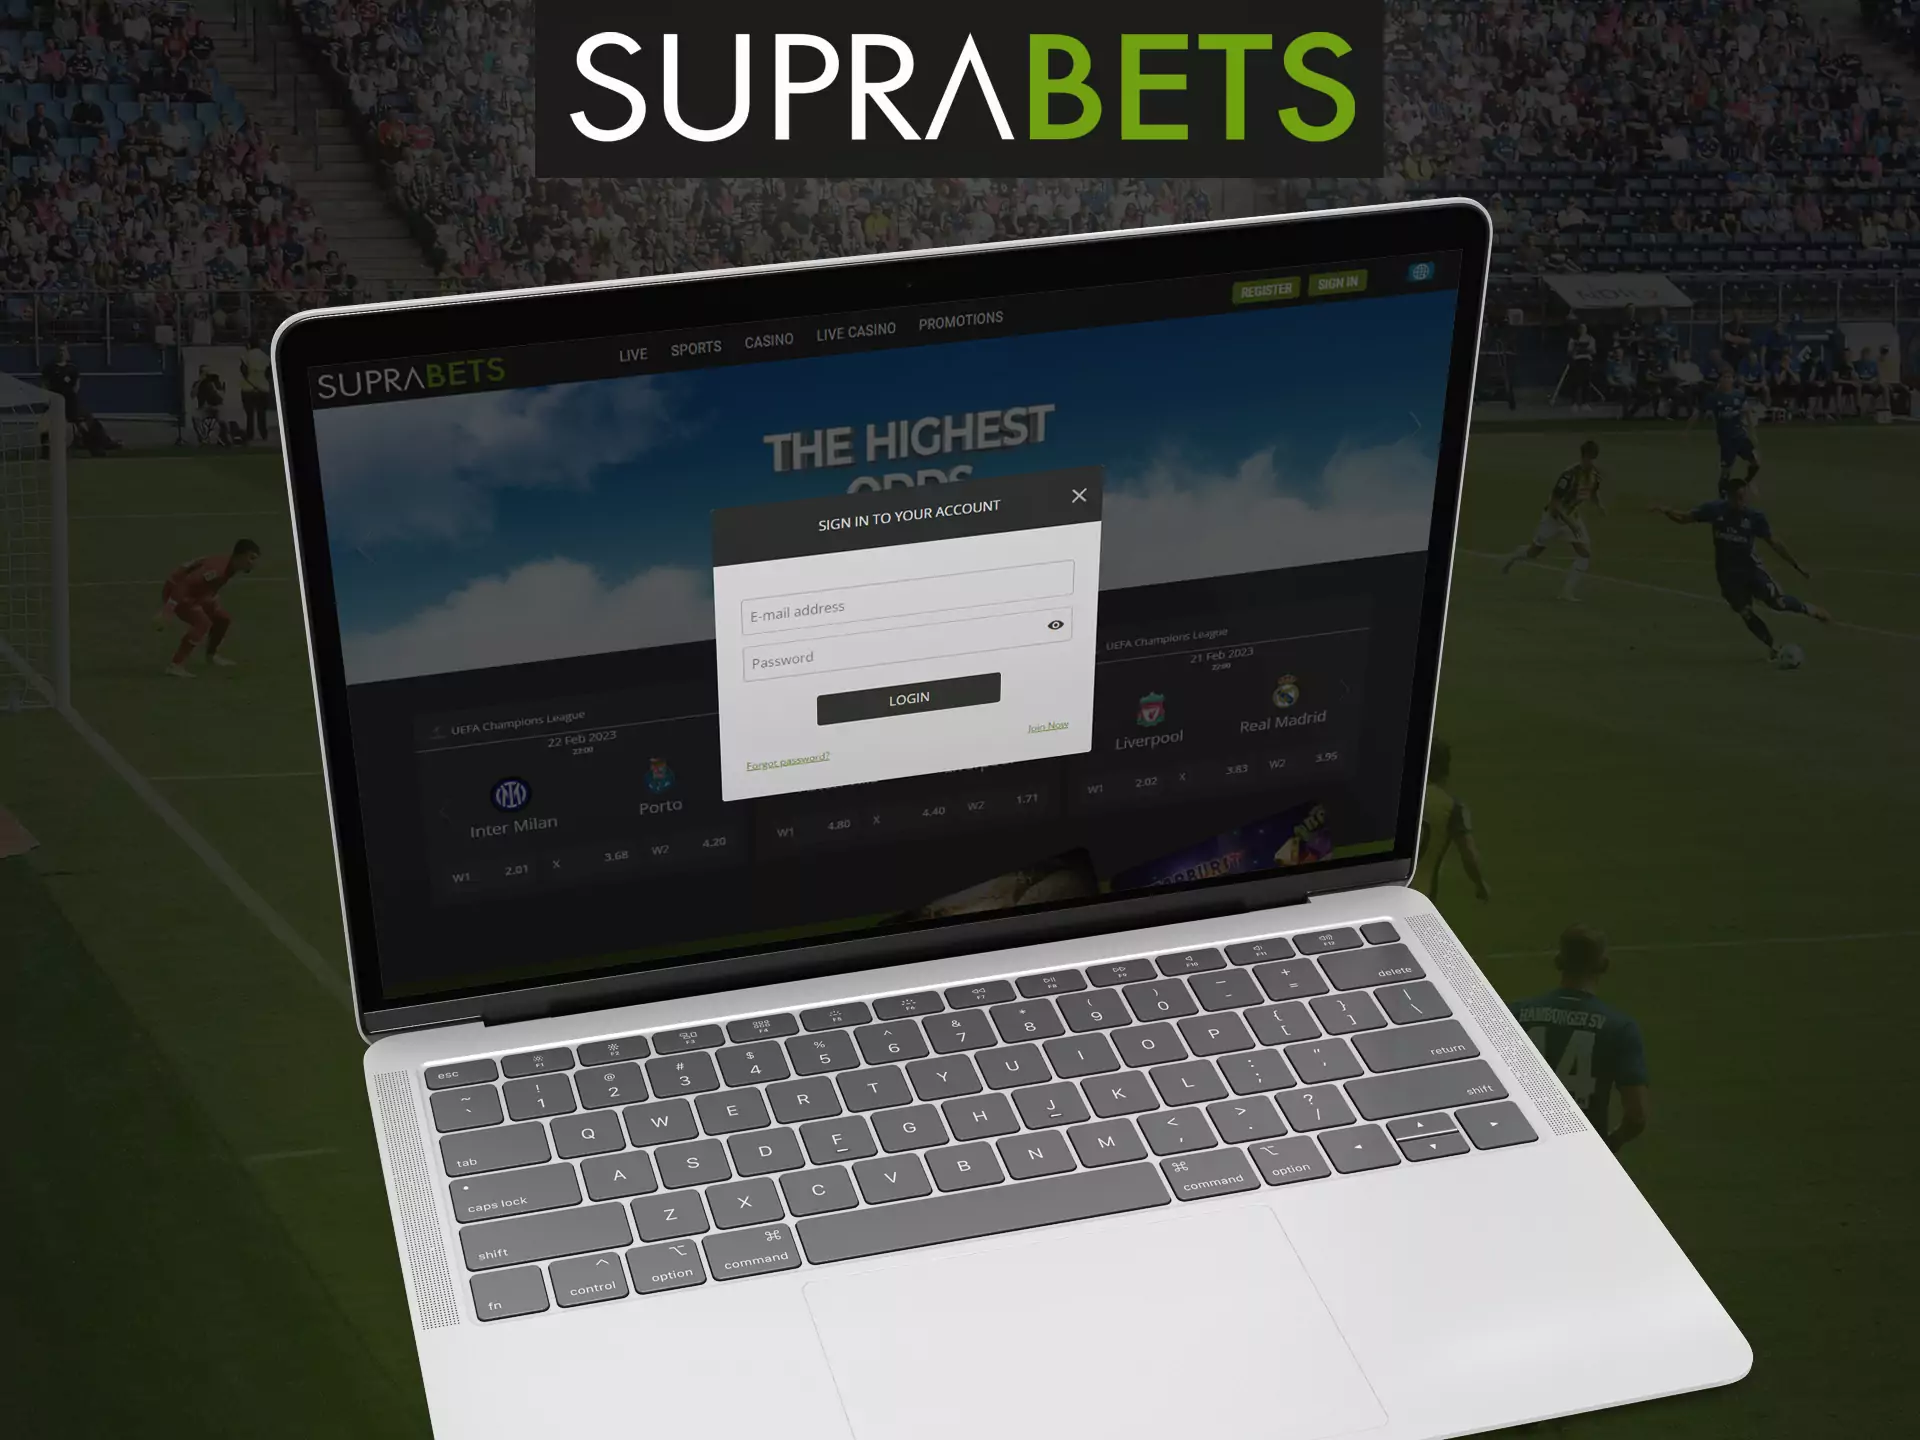 Log in to your Suprabets account to enjoy all the features and play.